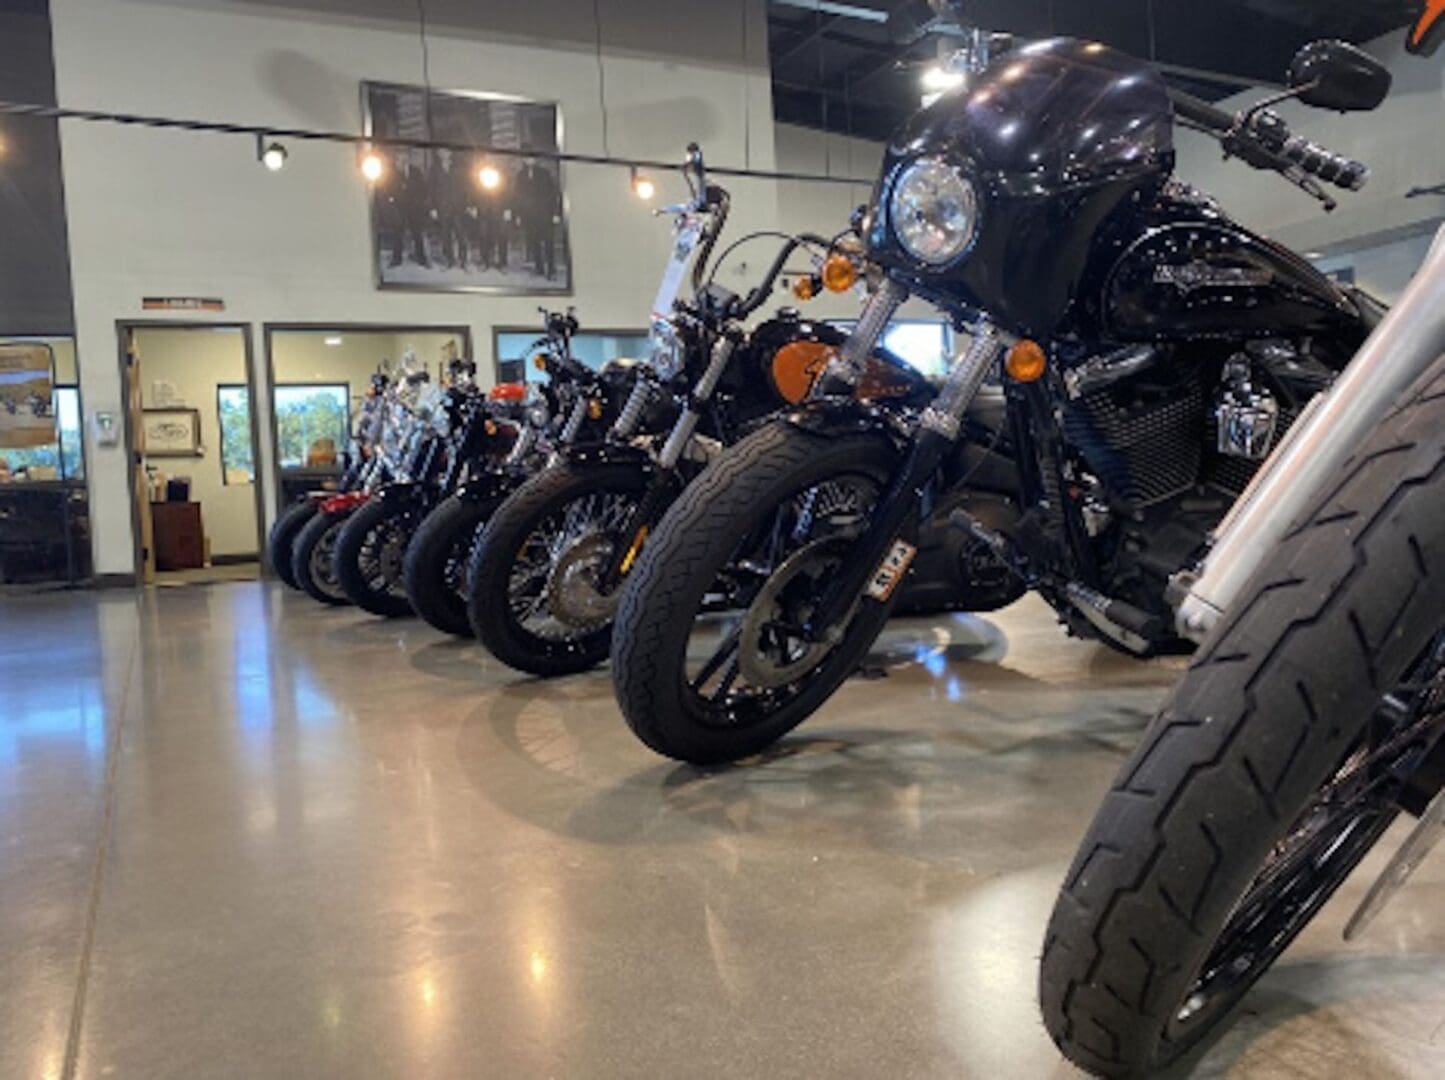 A row of motorcycles parked in a showroom.